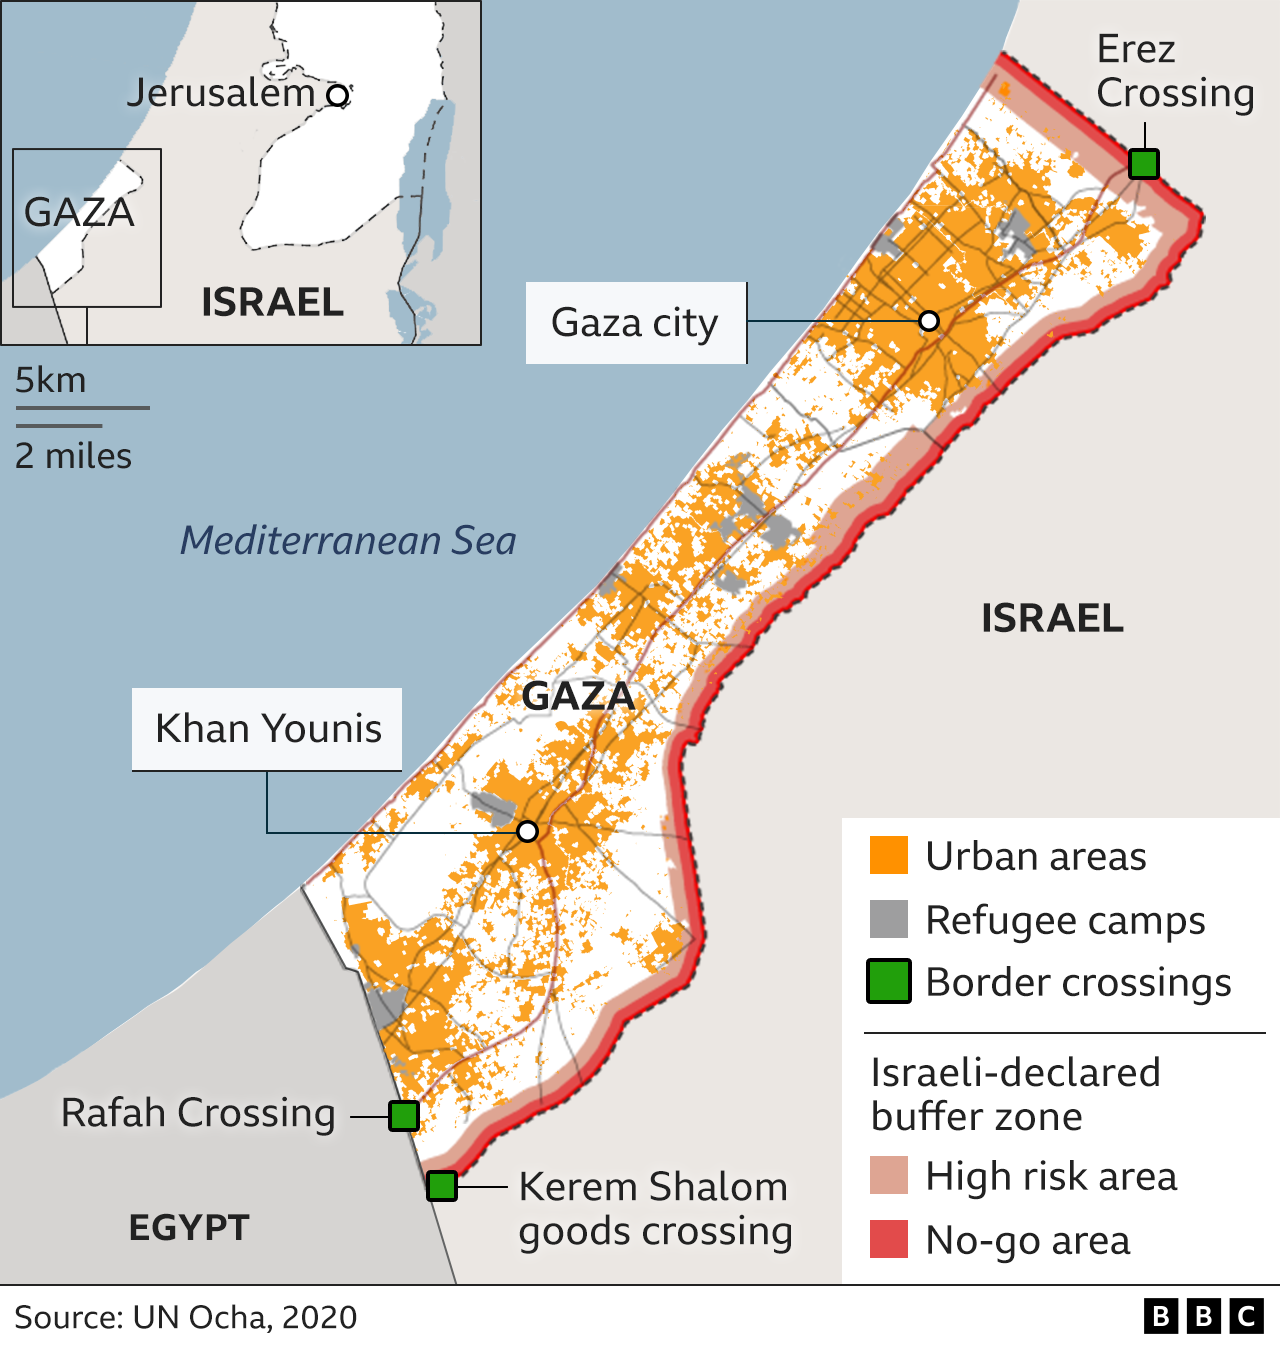 Map of Gaza, showing urban areas, refugee camps and border crossing between Gaza, Israel and Egypt. The map also shows the buffer zone declared by Israel